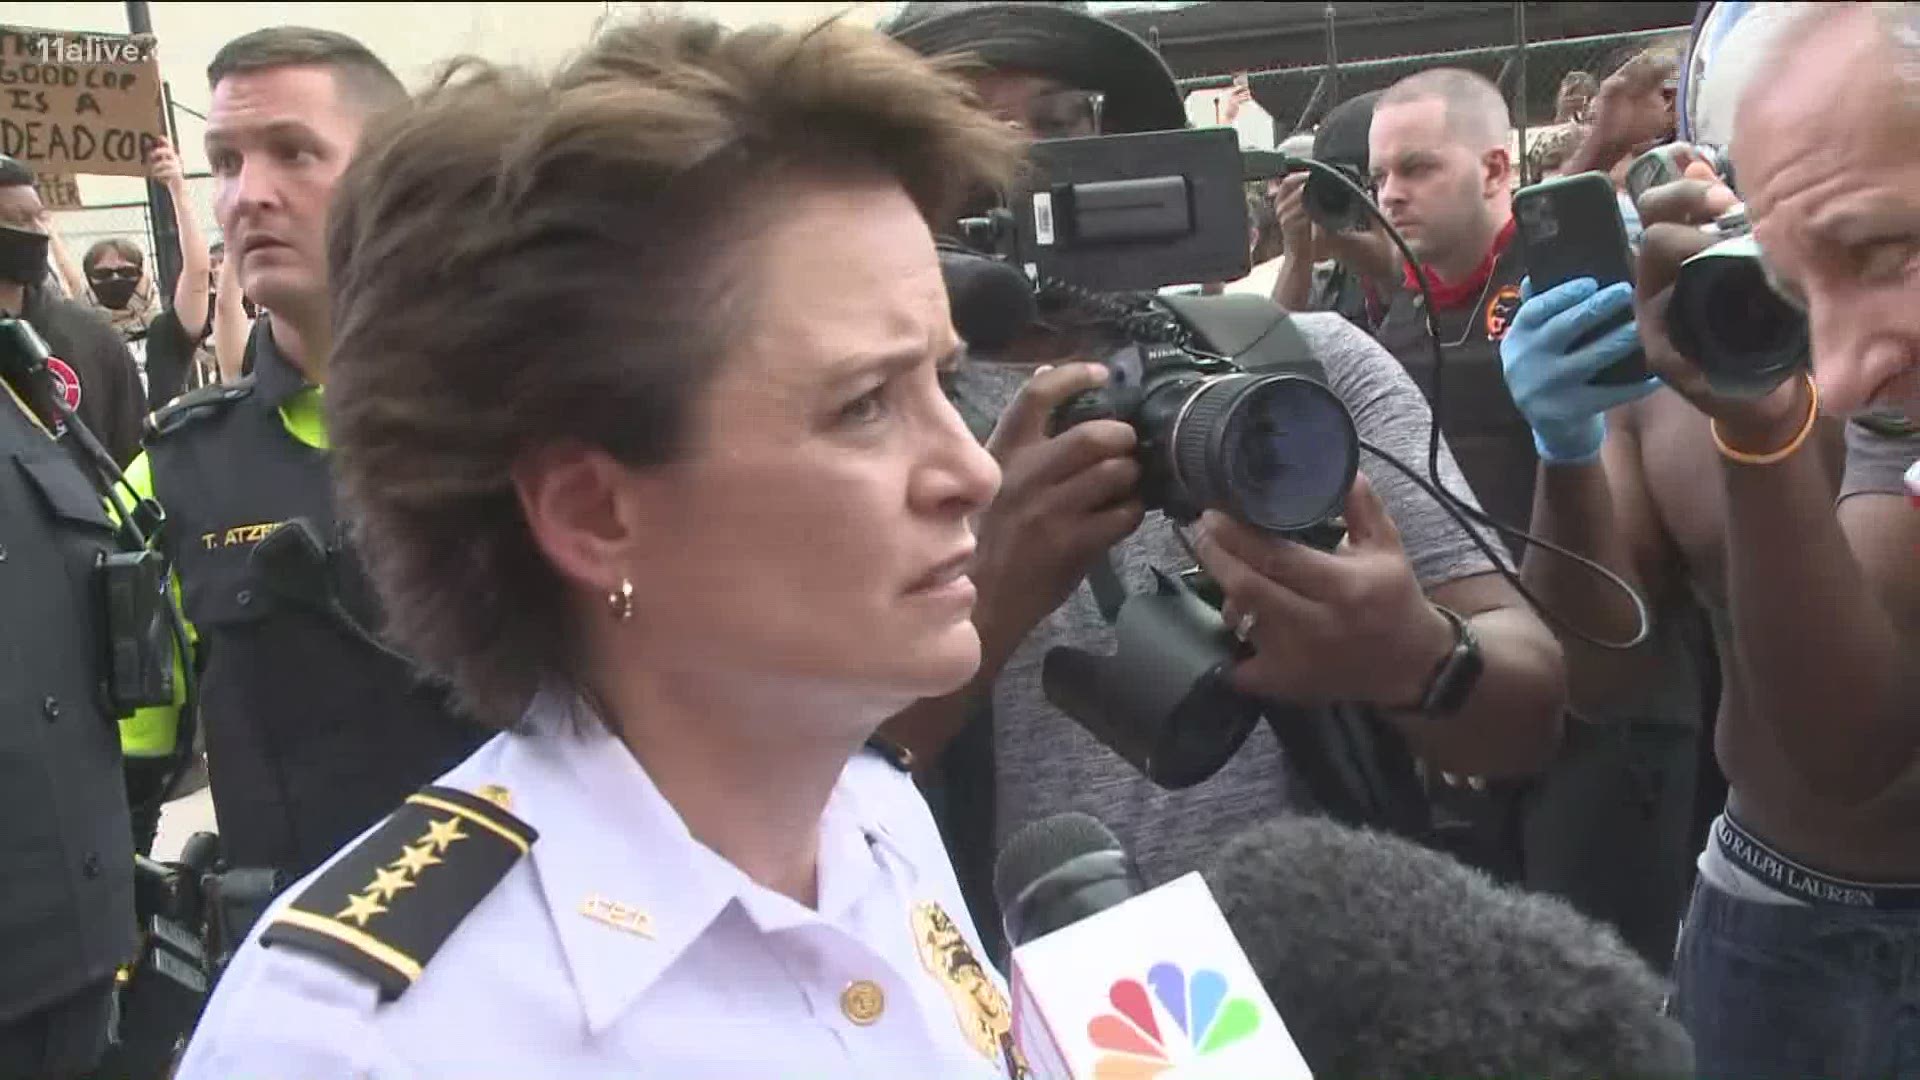 Atlanta Police Chief Erika Shields weighs in on the death of George Floyd, calling it appalling.